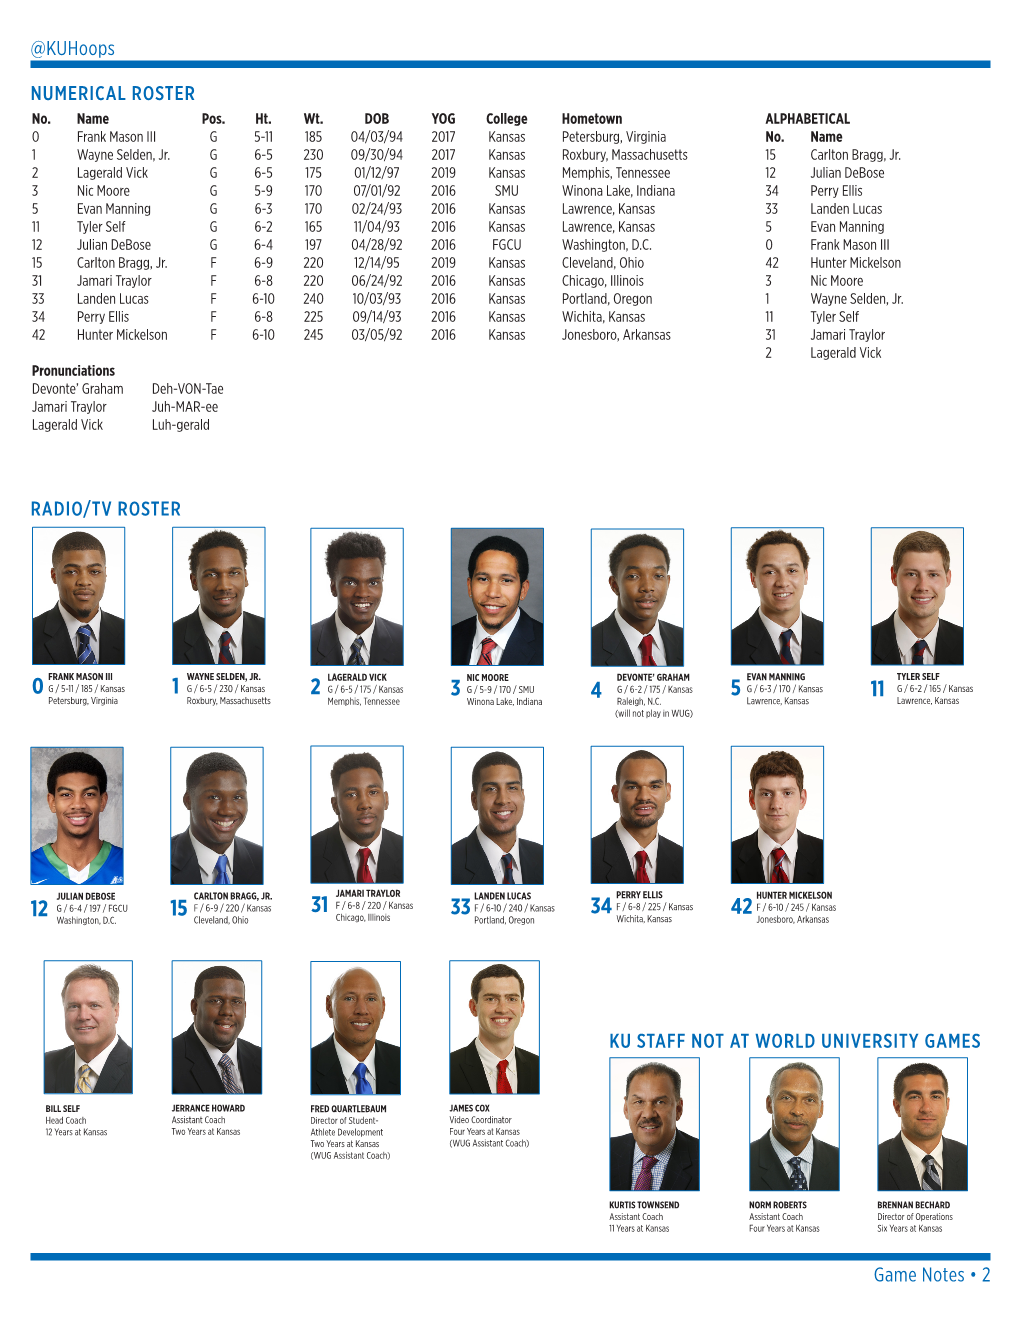 @Kuhoops Game Notes • 2 NUMERICAL ROSTER RADIO/TV